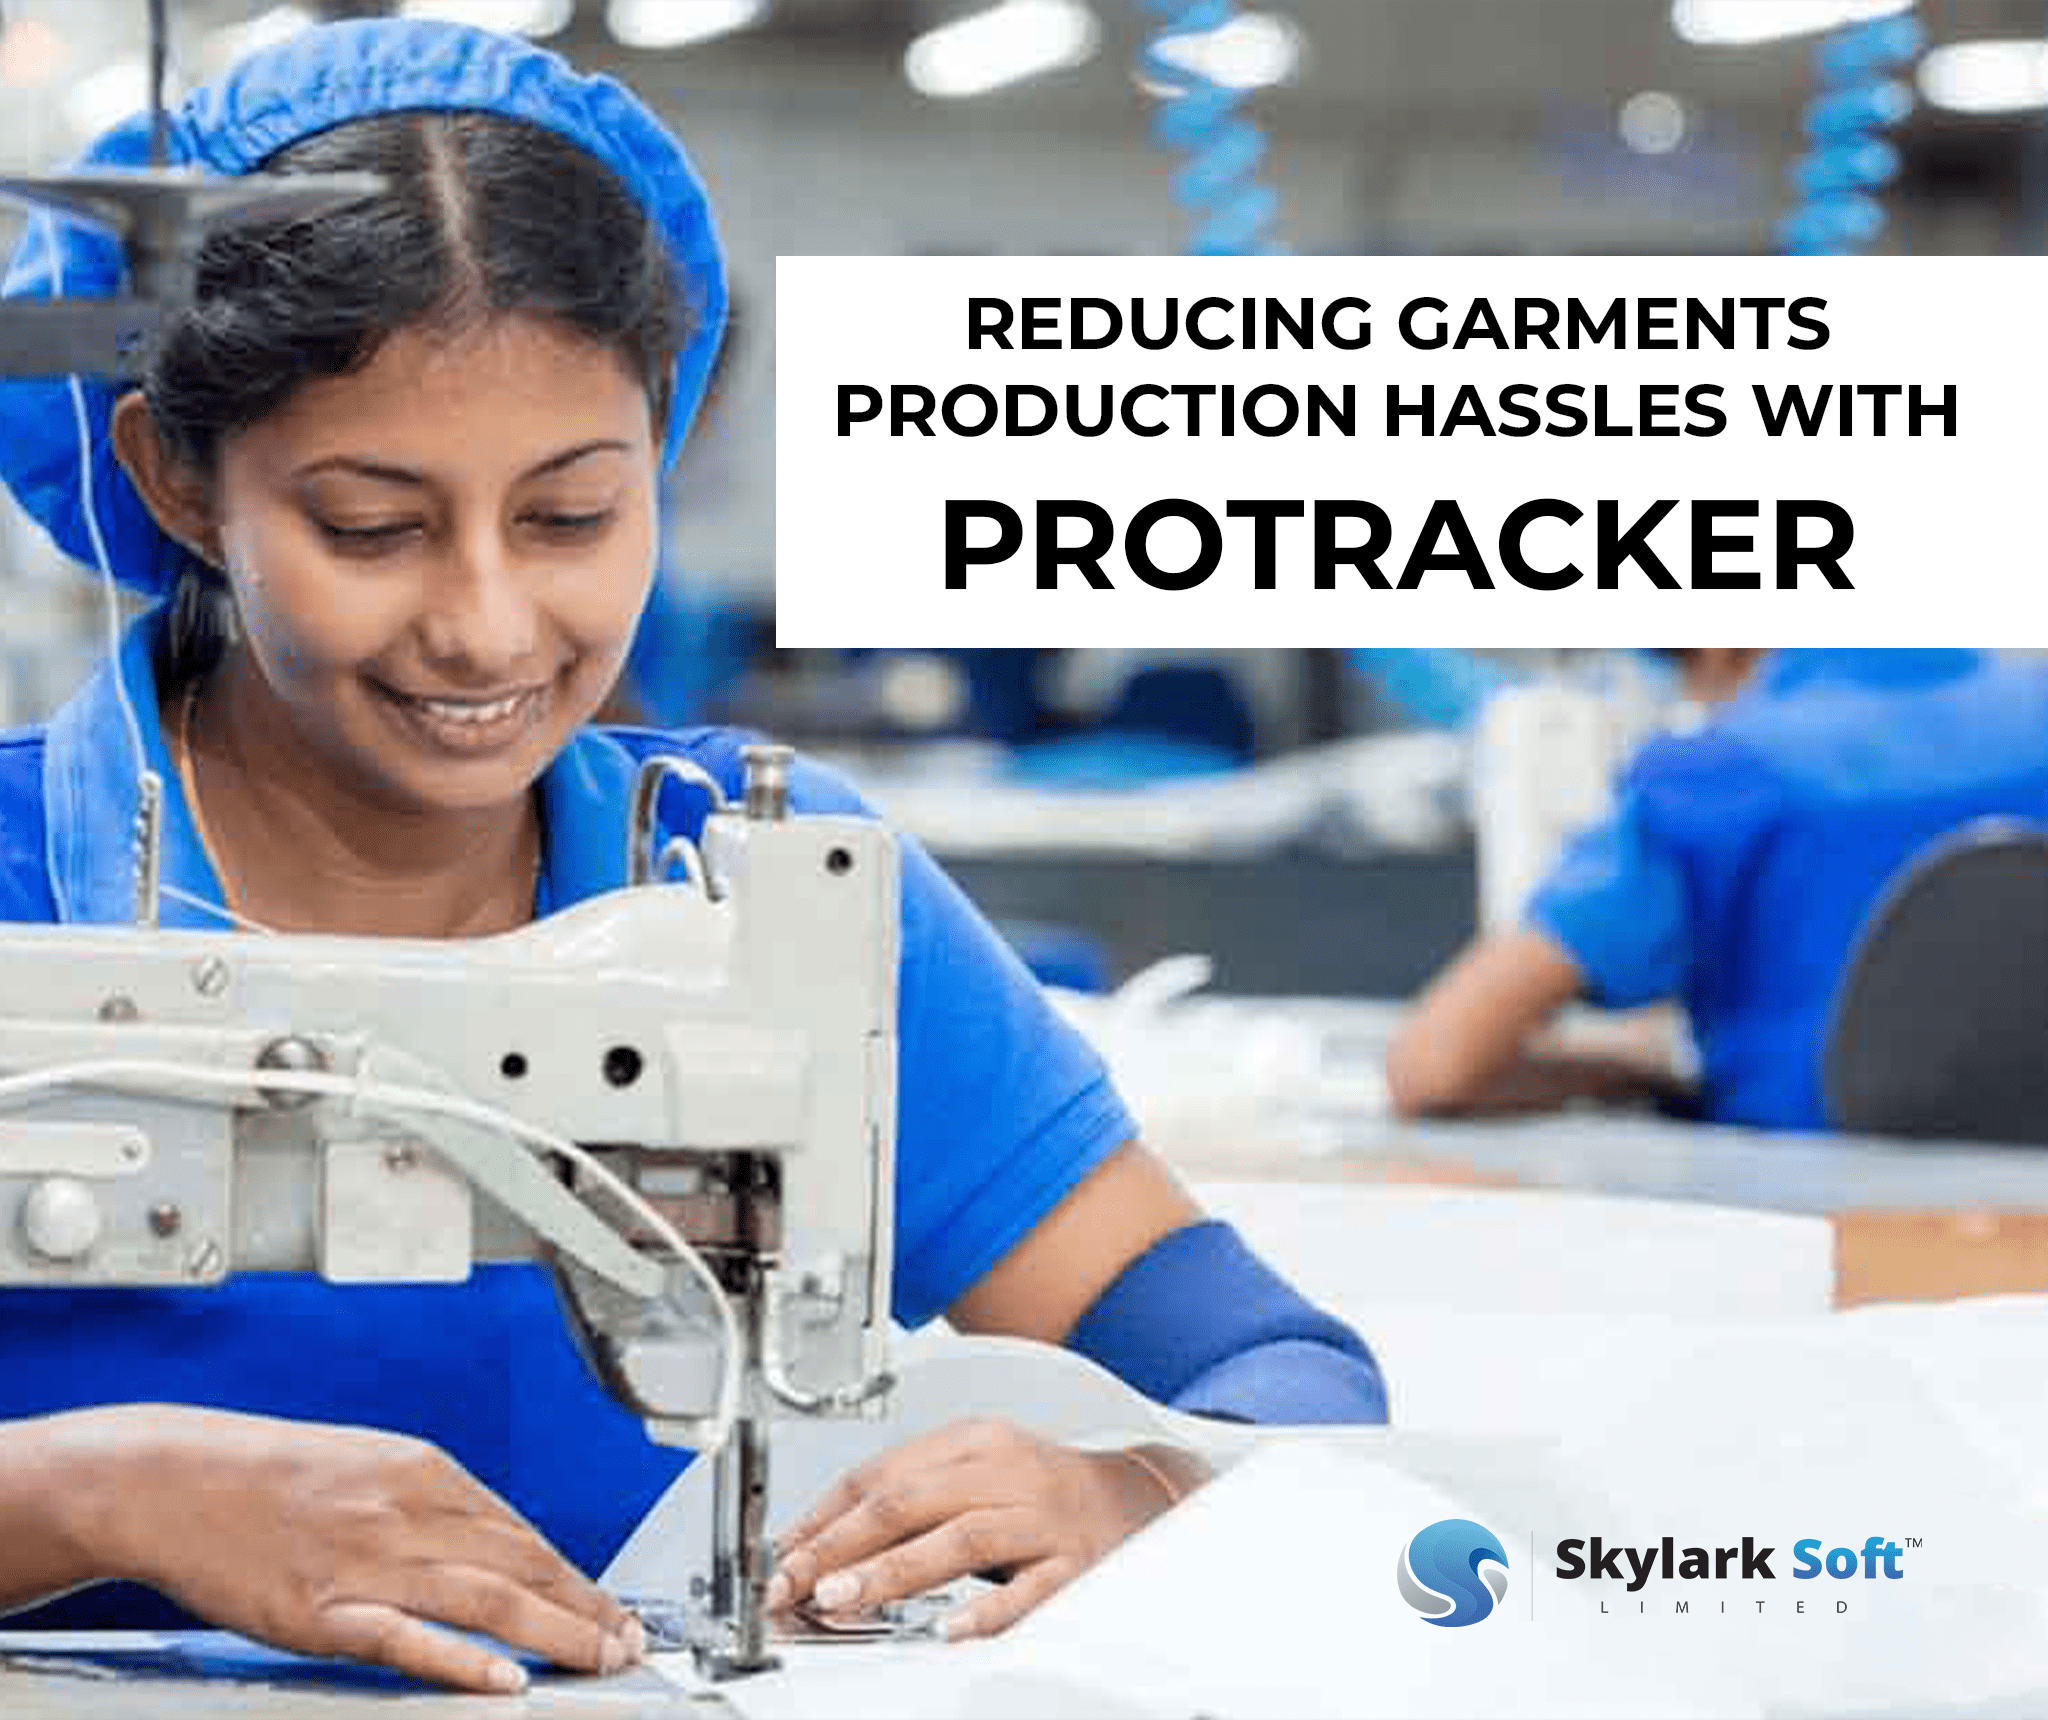 REDUCING GARMENTS PRODUCTION HASSLES WITH PROTRACKER Skylark Soft Limited